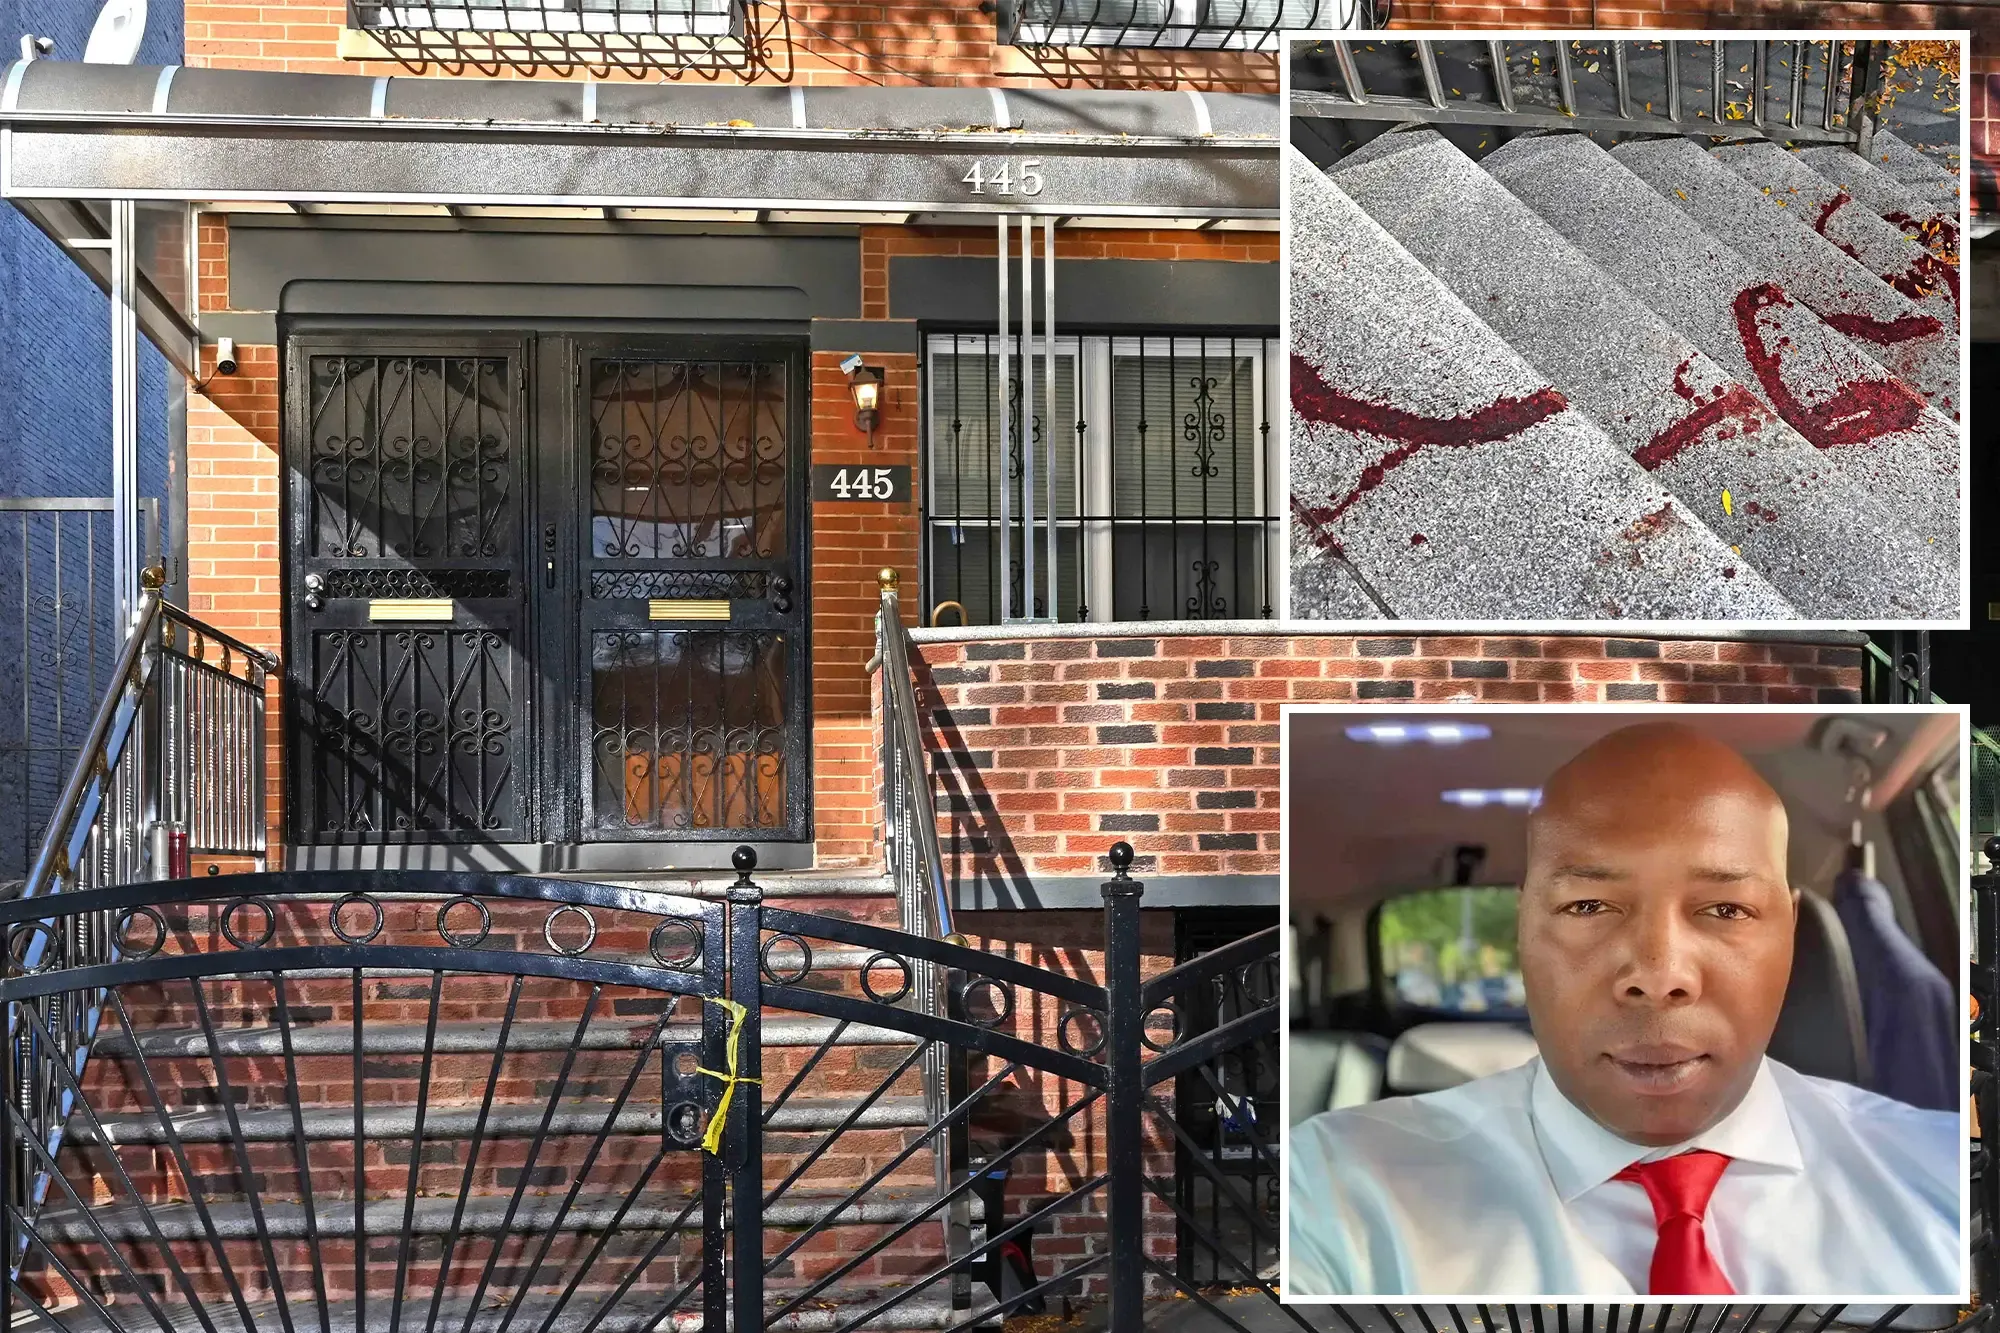 MTA employee landlord fatally shoots tenant with illegal gun after breaking into NYC home: sources